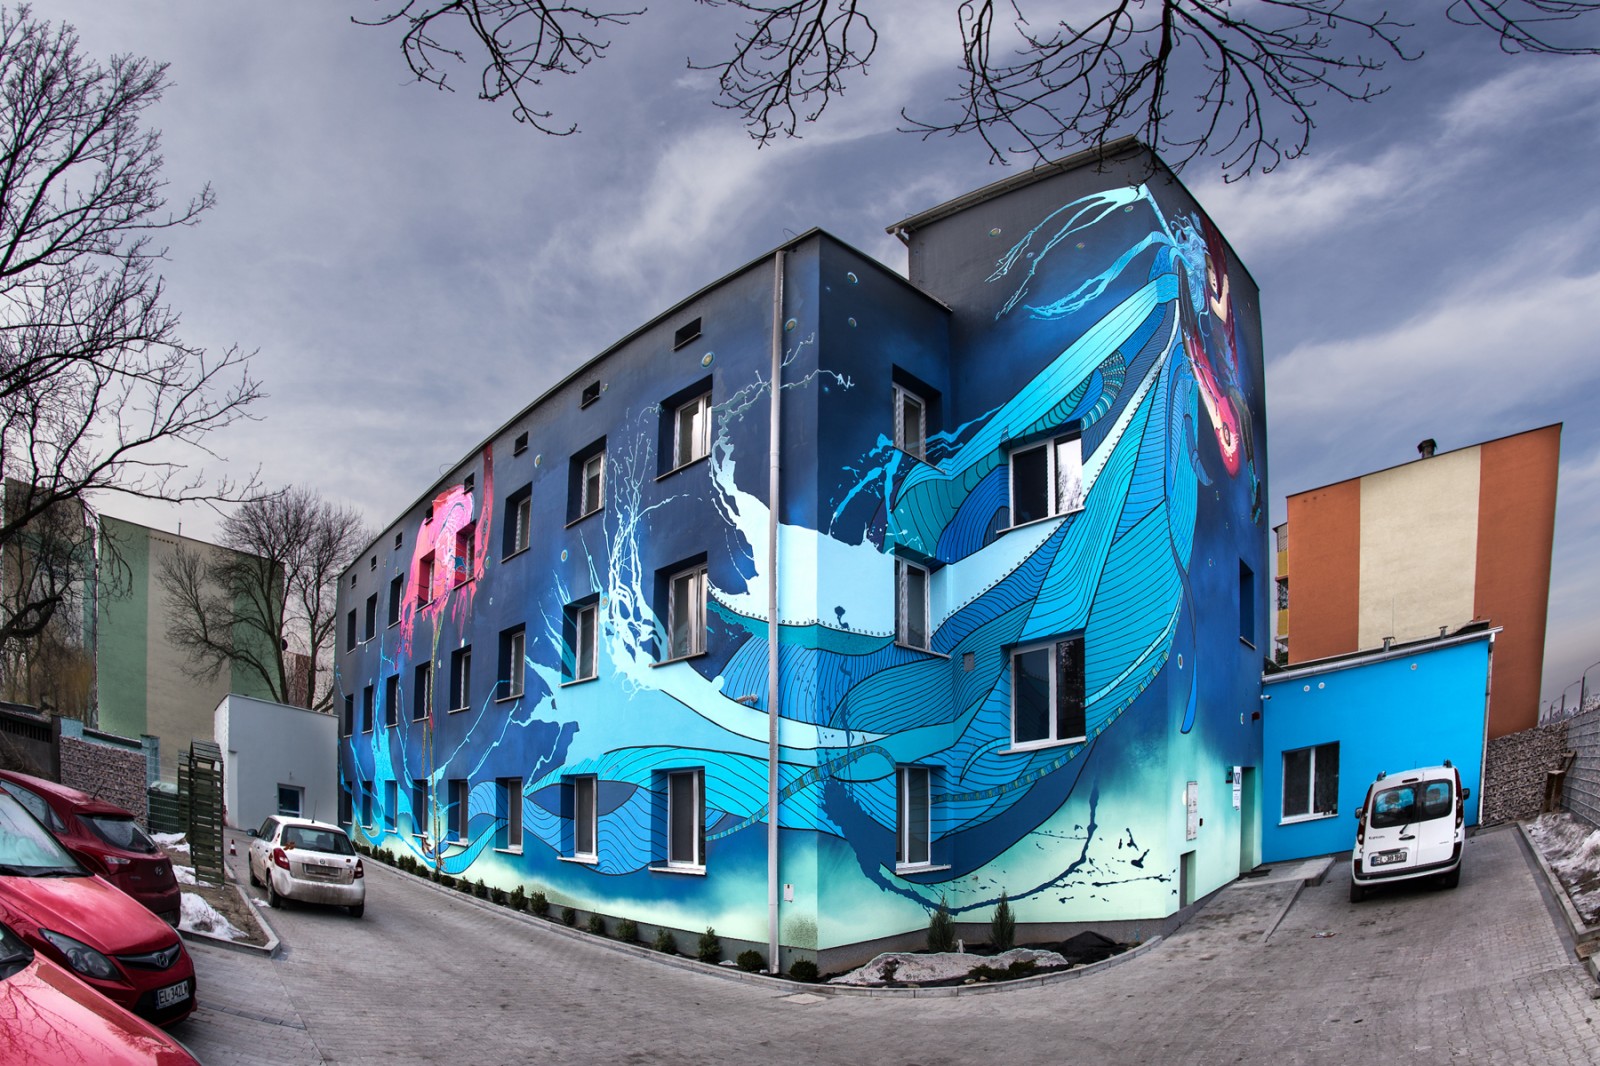 Painted Hospice for Children building in Lodz Foundation Gajusz | Hospice – Gajusz Foundation  | CSR | About us